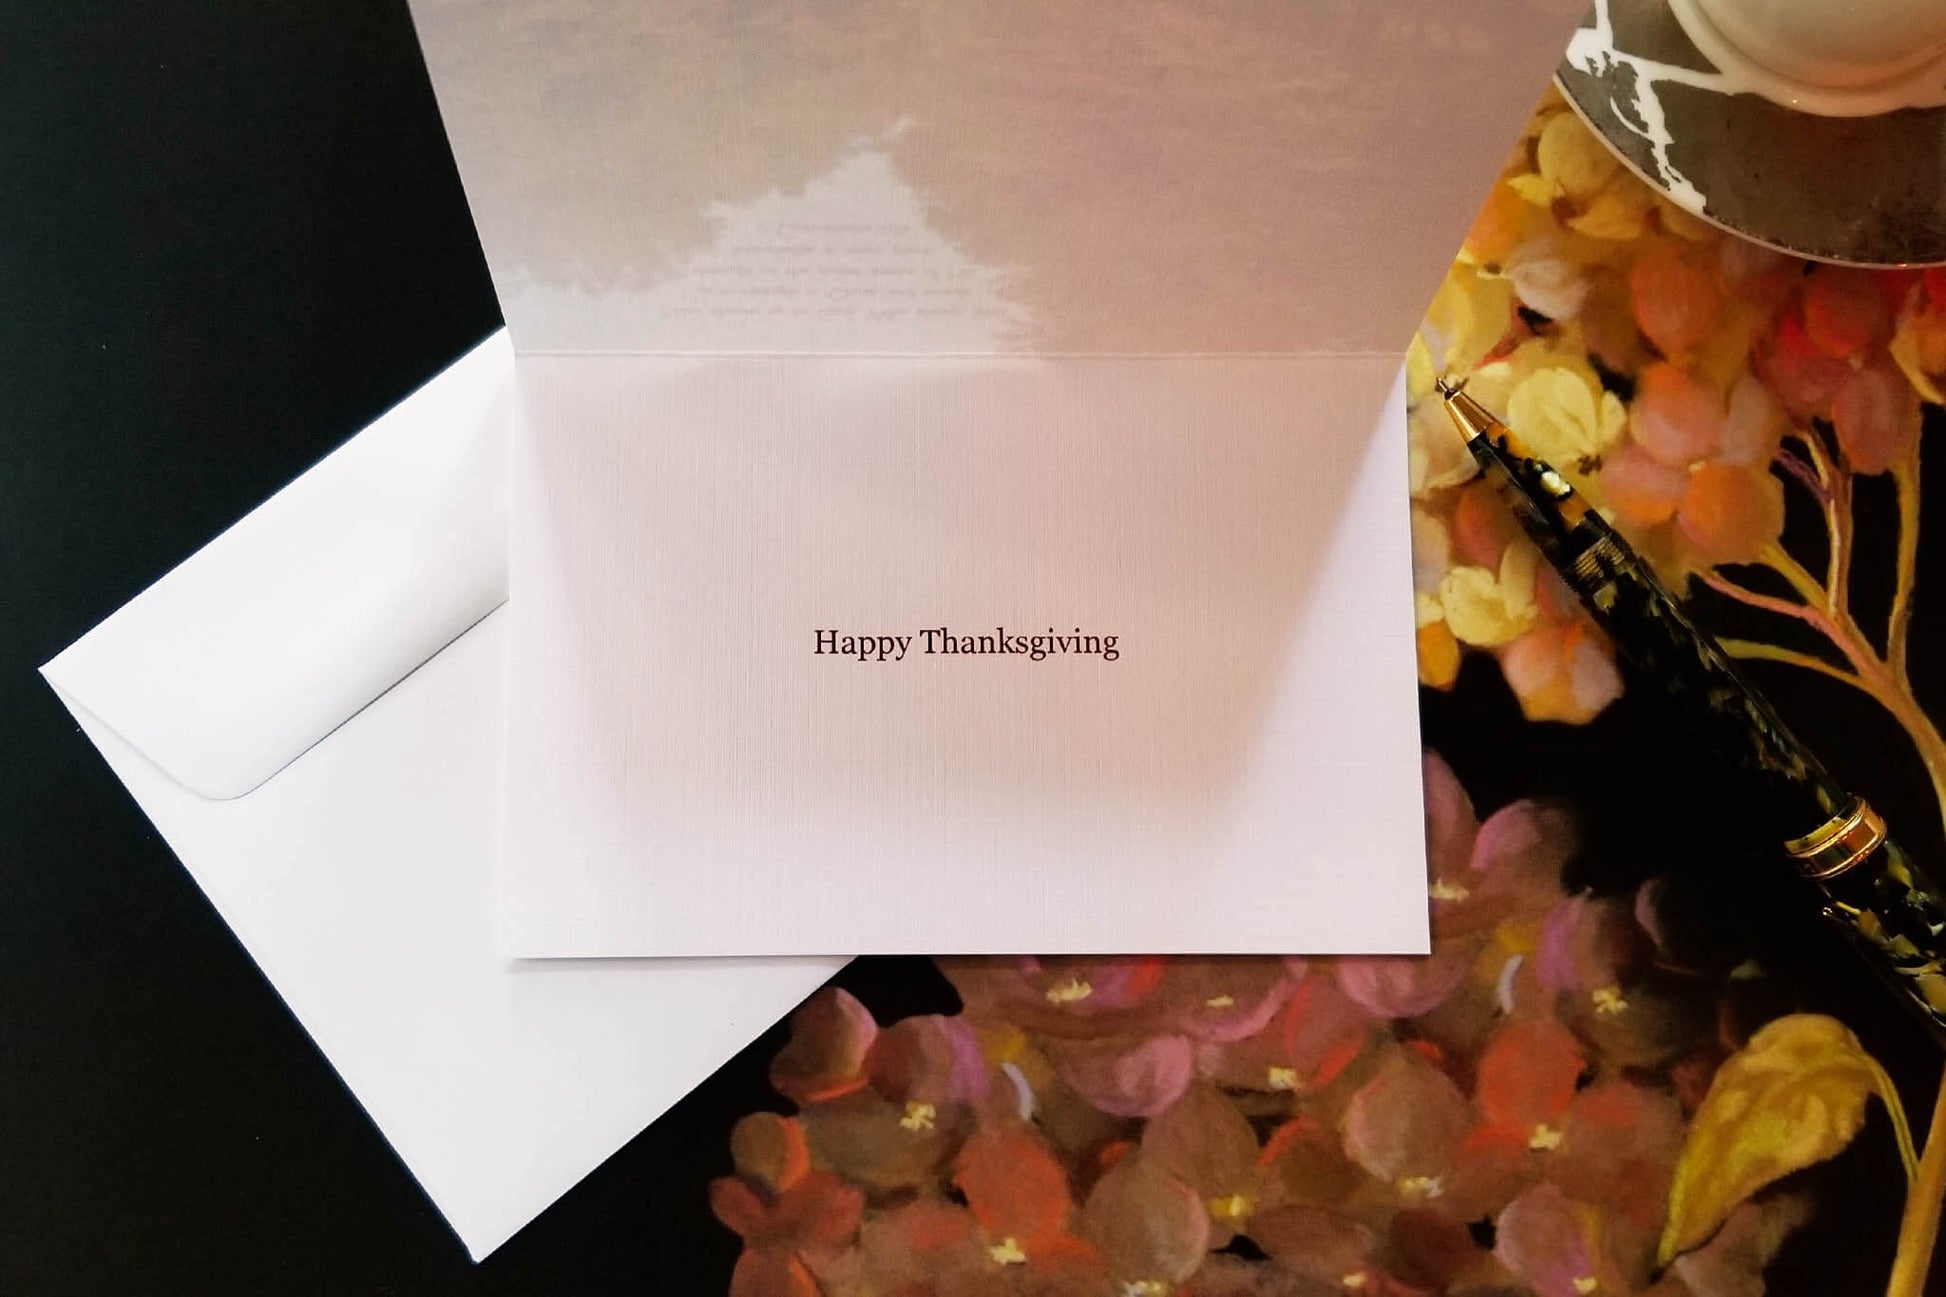 2 Corinthians 2:14 FW Textured Linen Christian greeting card with Happy Thanksgiving inside